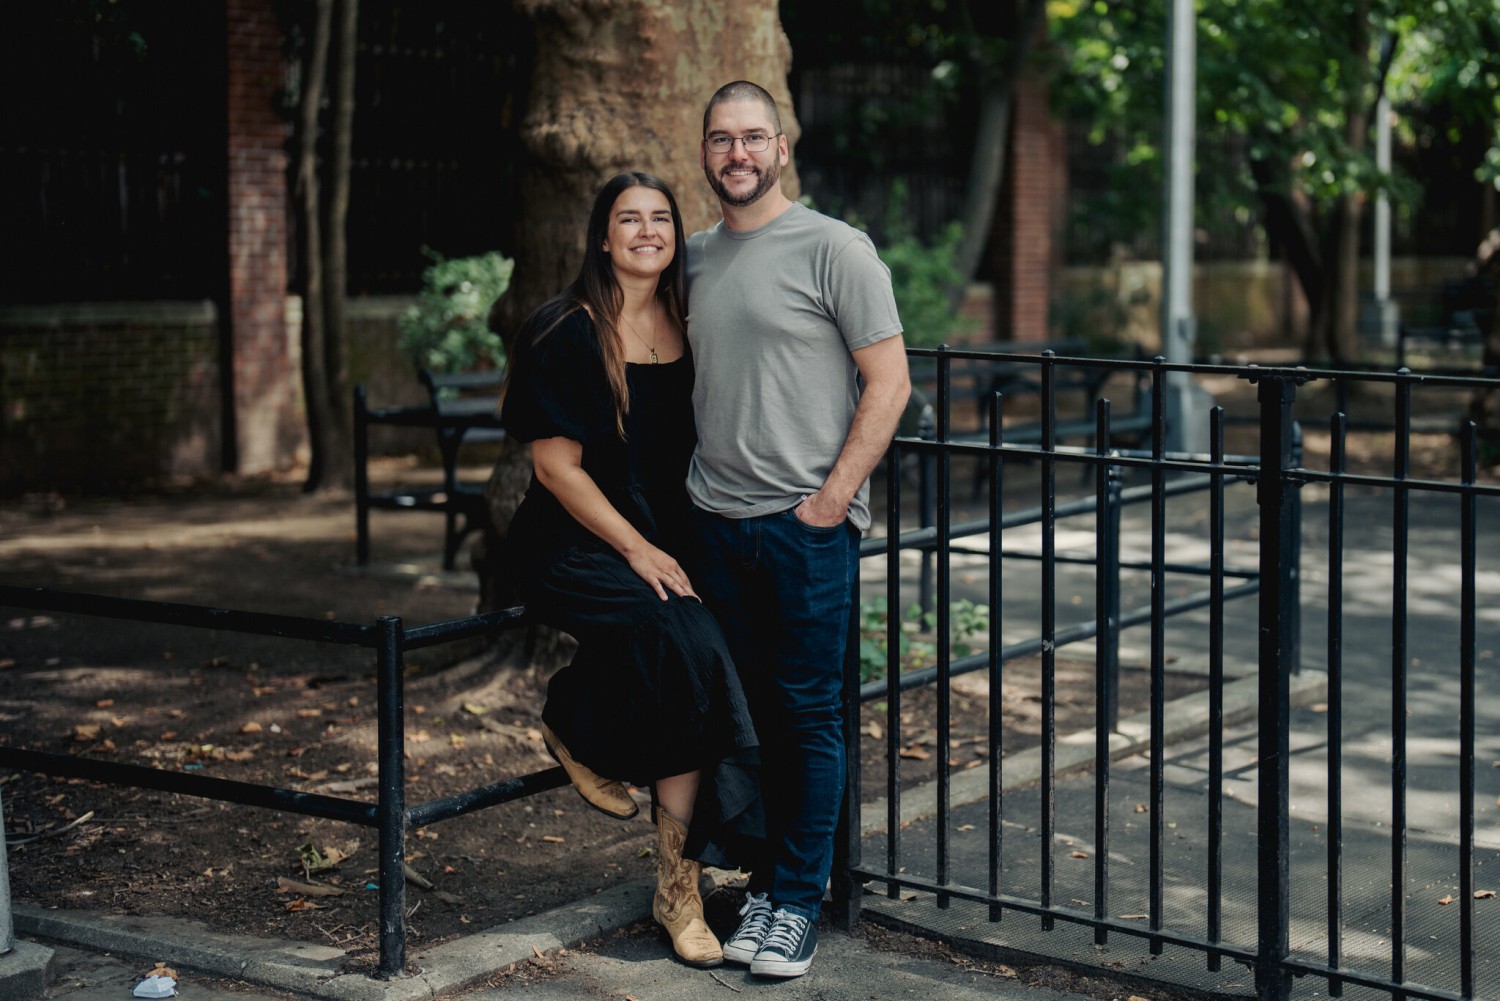 Taylor and Mat Batts in Brooklyn, where they hoped to find a one-bedroom apartment for about $625,000 after renting in the area. Amir Hamja/The New York Times